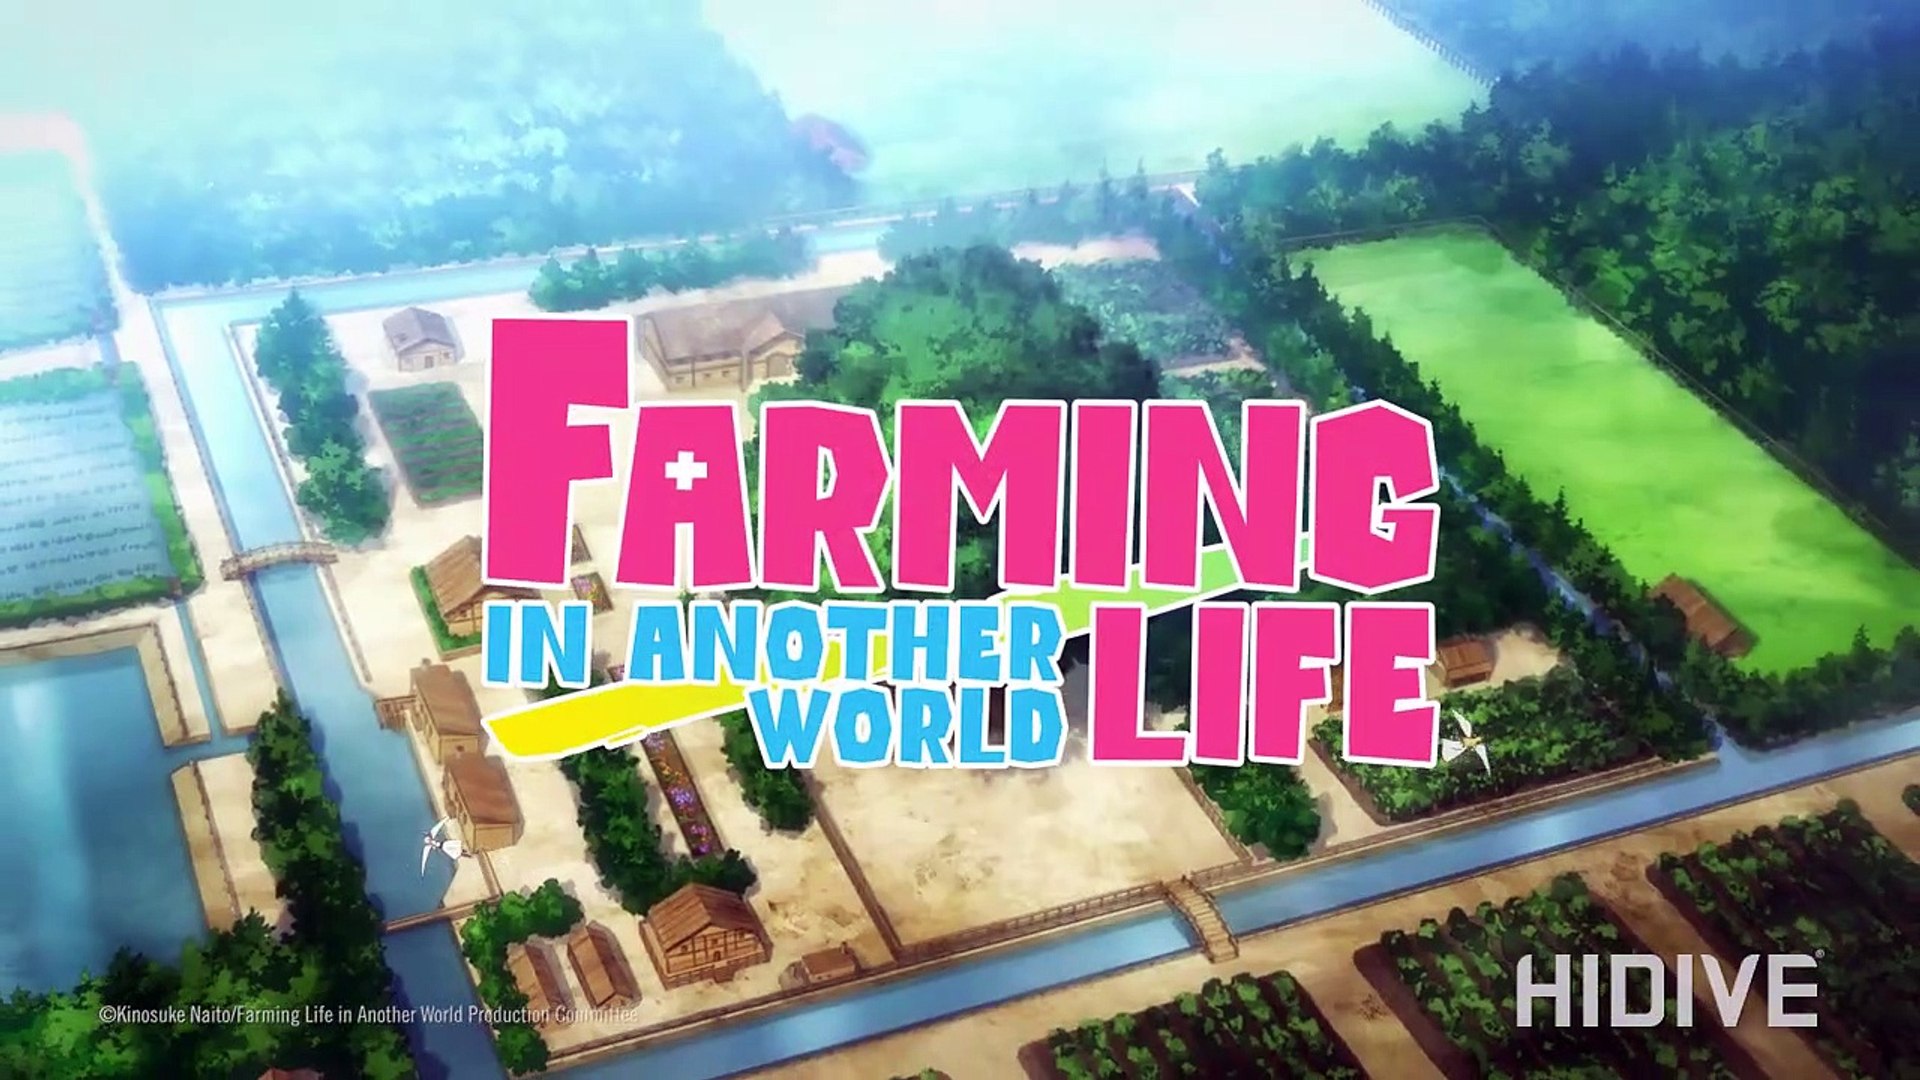 Farming Life in Another World Trailer